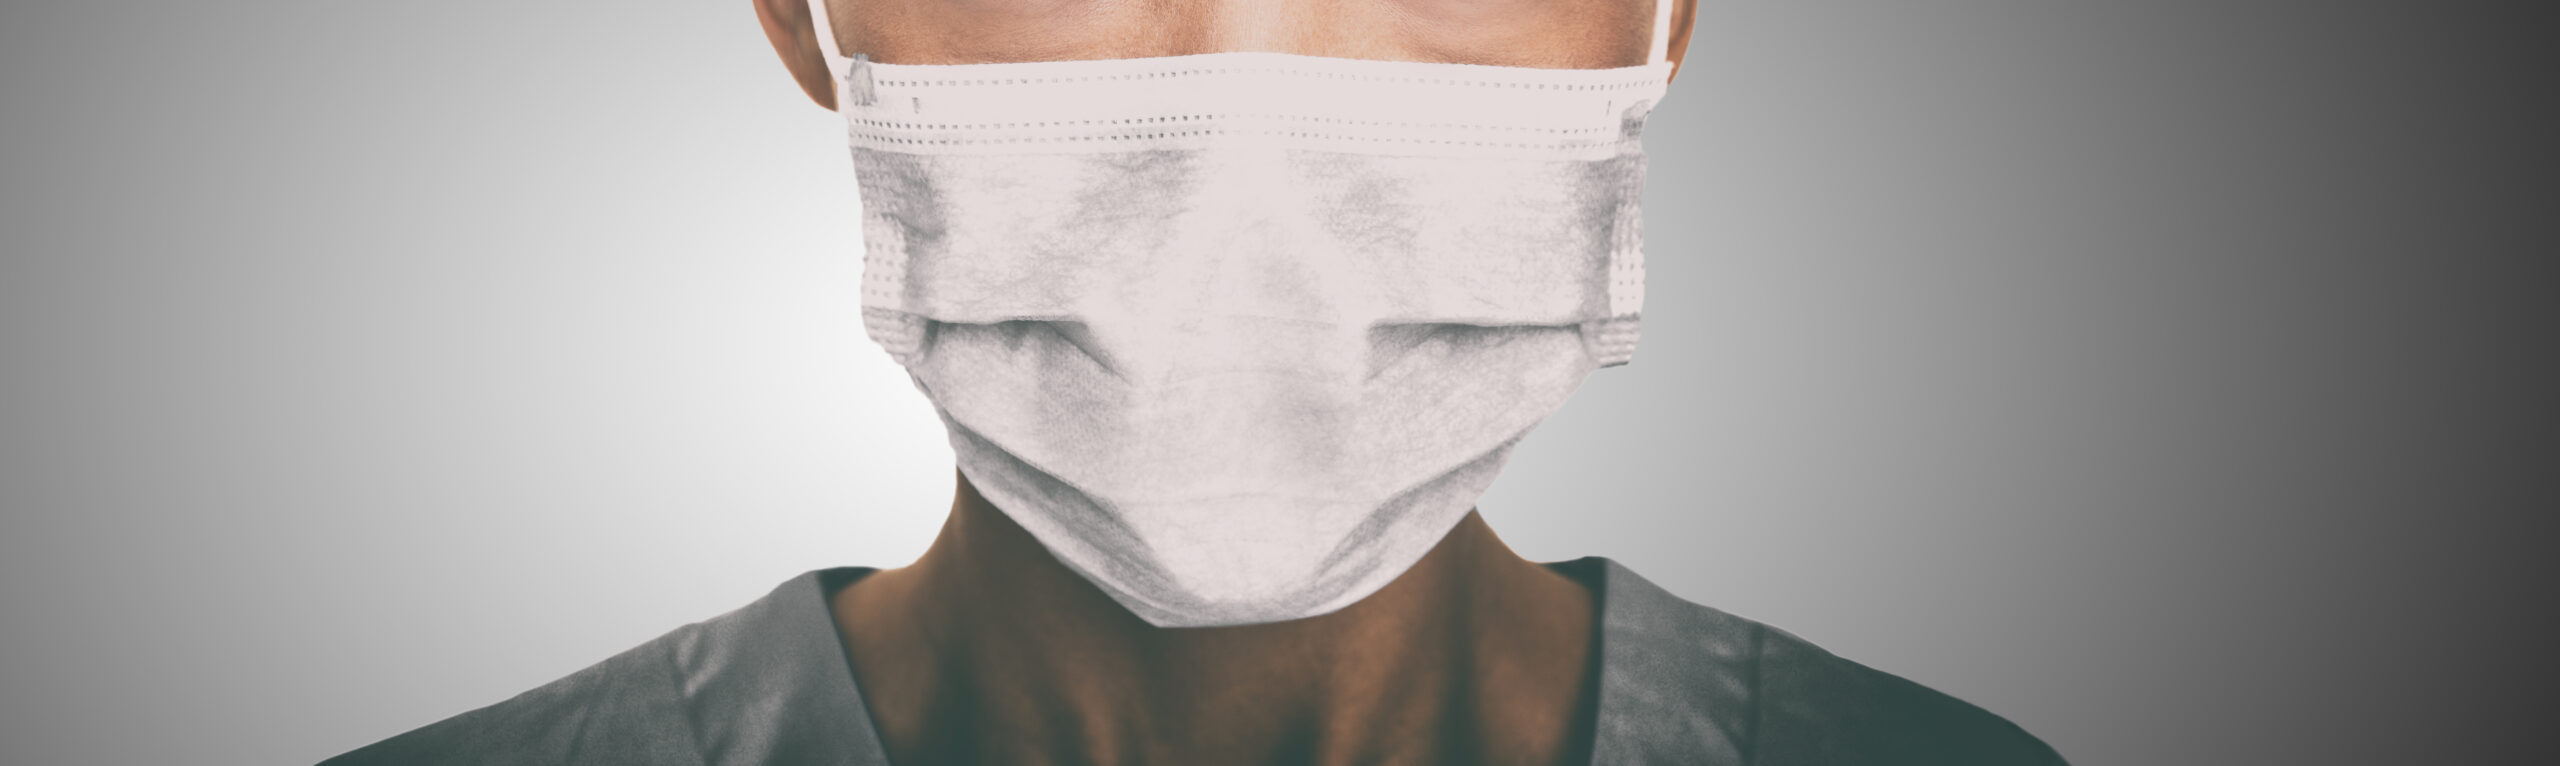 A healthcare worker wears a mask while facing the camera in front of a neutral background.